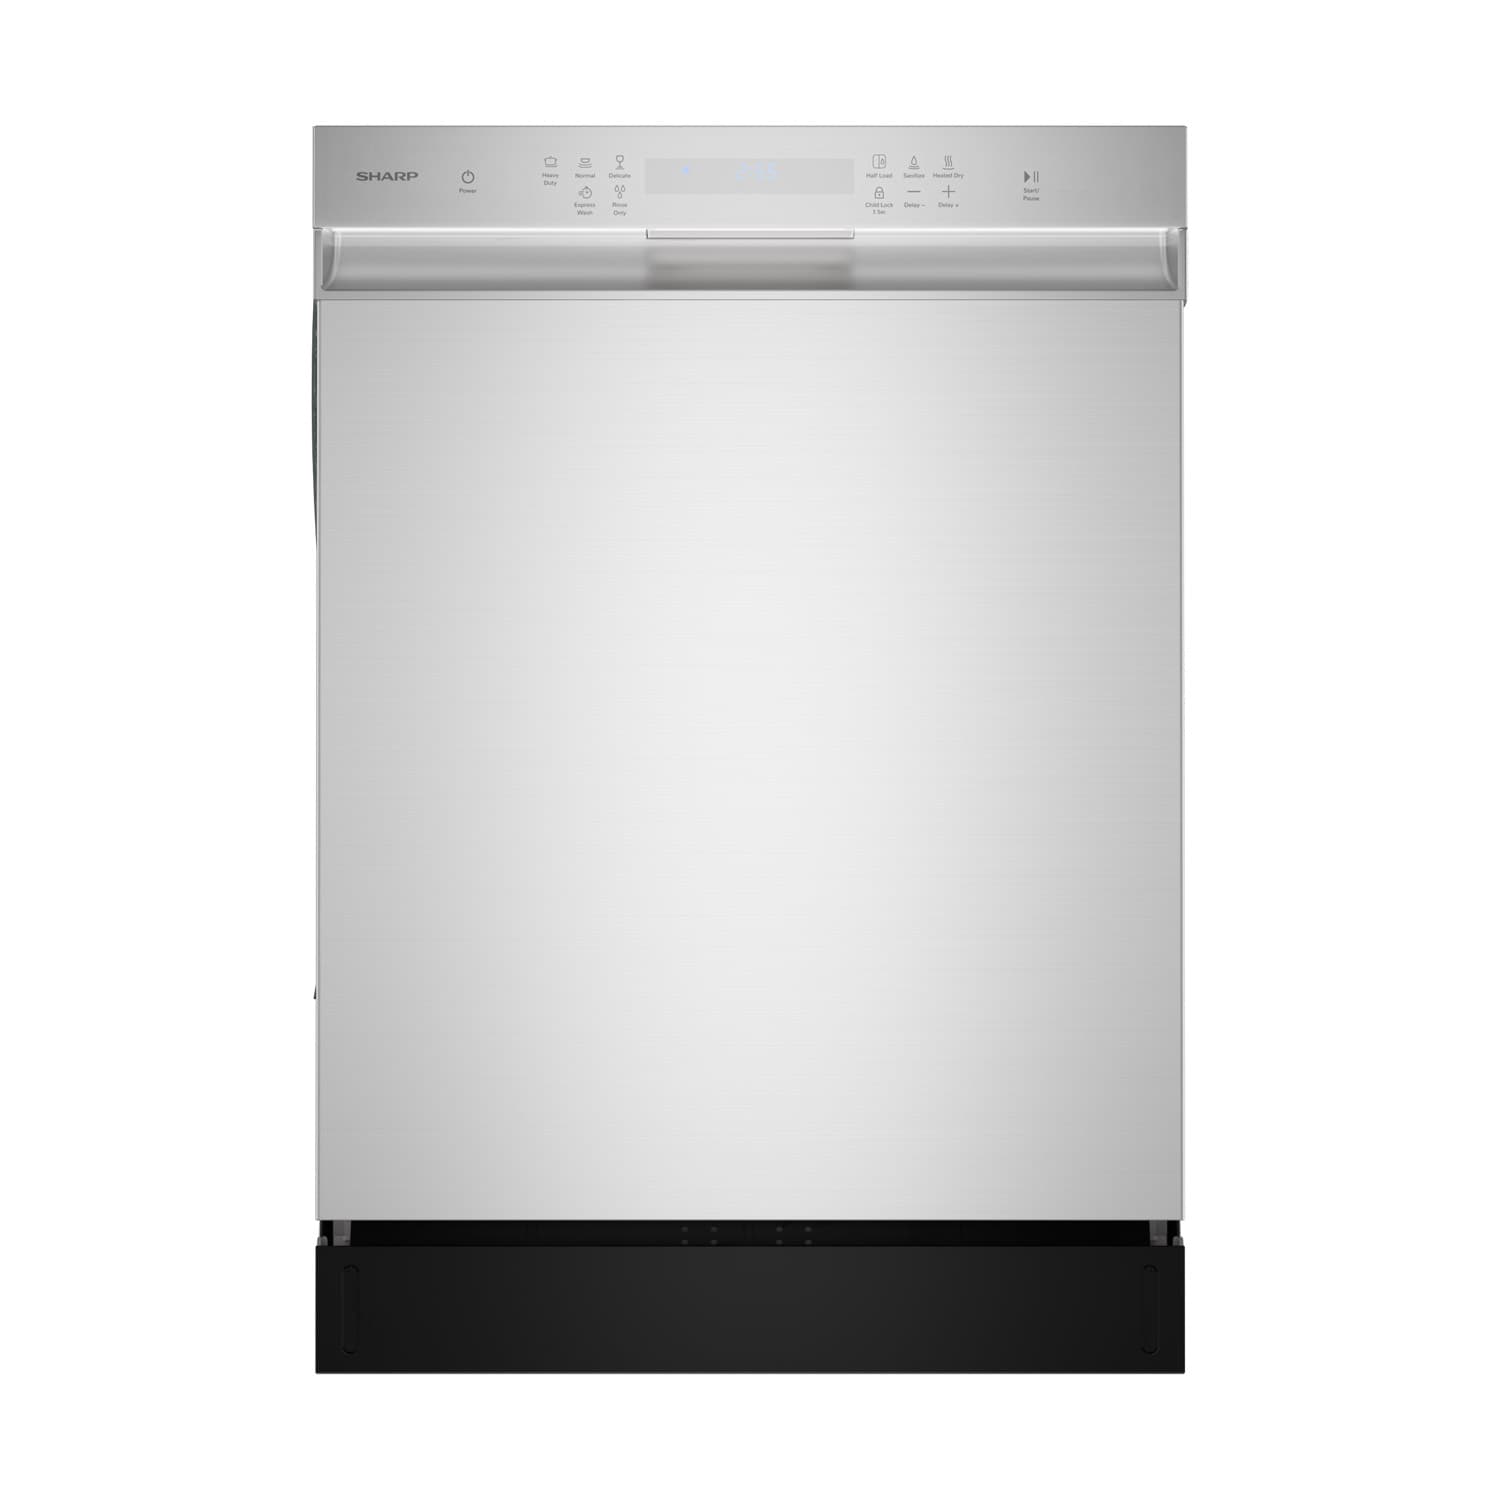 LG QuadWash Front Control 24-in Built-In Dishwasher With Third Rack (White)  ENERGY STAR, 48-dBA in the Built-In Dishwashers department at